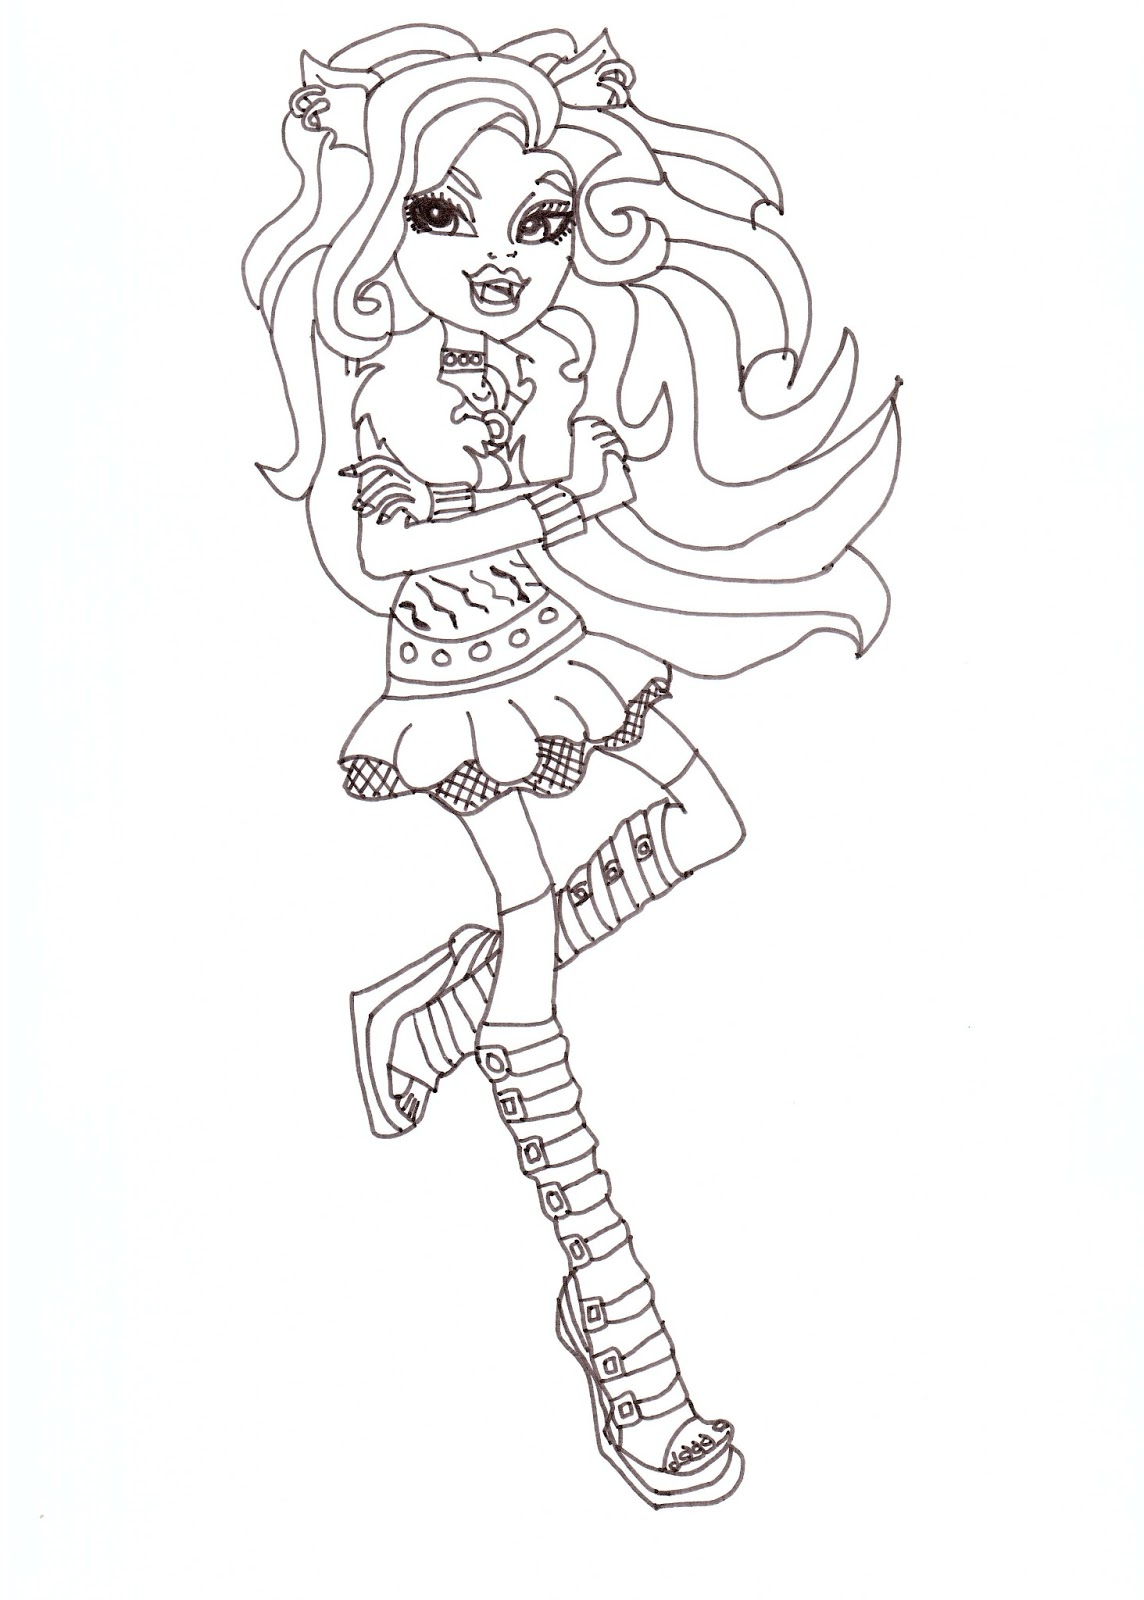 Clawdeen Coloring Sheet CLICK HERE TO PRINT Free printable monster high